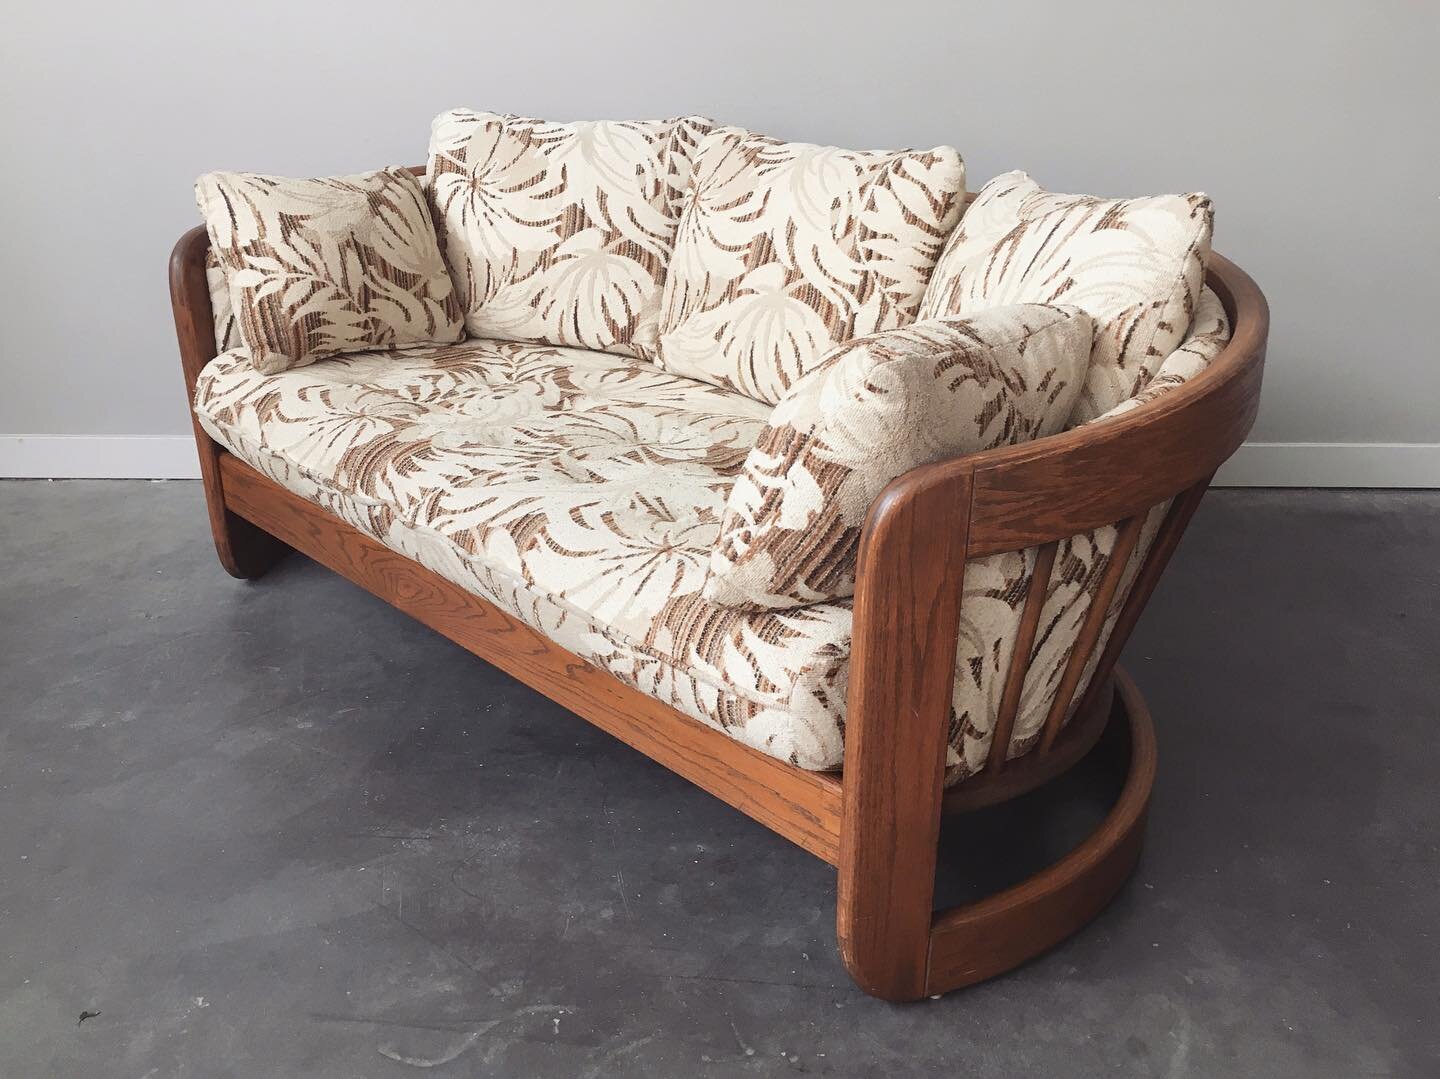 Gorgeous vintage 7 piece living room suite by Howard Furniture in original monstera leaf patterned upholstery. Check out that rad cantilevered oak frame👀
Sofa, loveseat, chair, ottoman, coffee table, pair of side tables, now available to purchase to